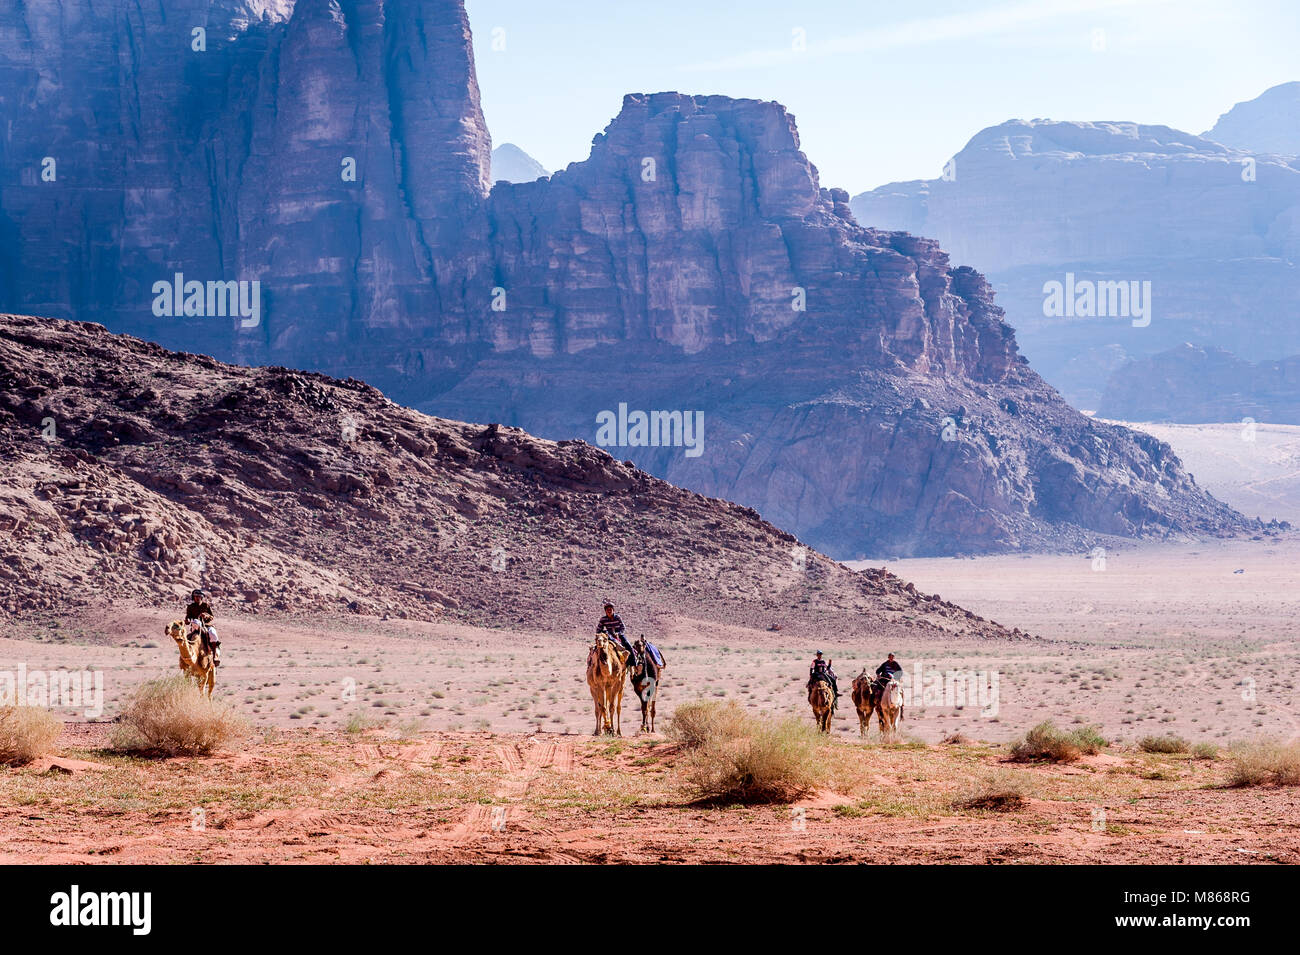 Bédouins with camels in front of the impressive blue mountain ridge in Wadi Rum,Jordan. Stock Photo